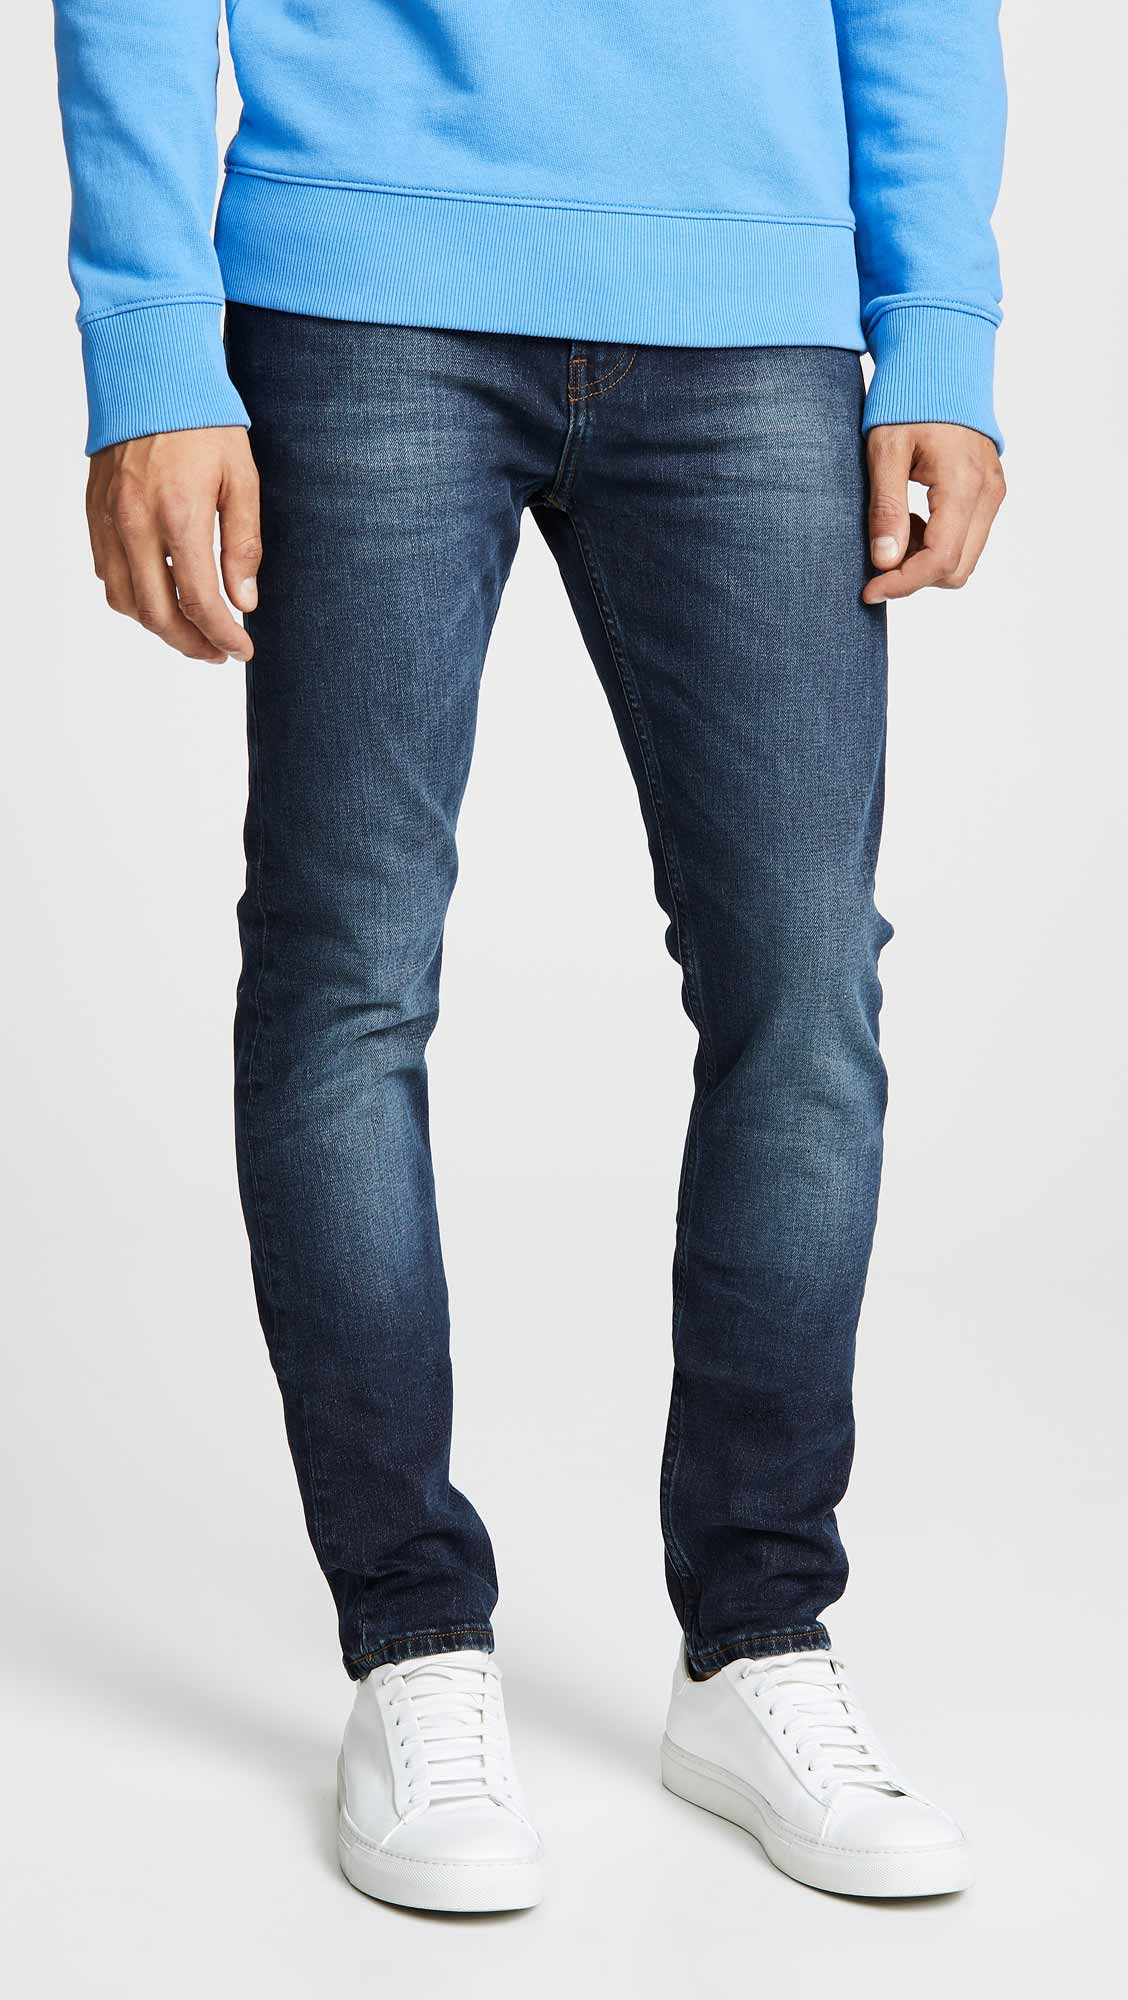 8 Classic Men’s Skinny Jeans For Fall 2018 – THE JEANS BLOG